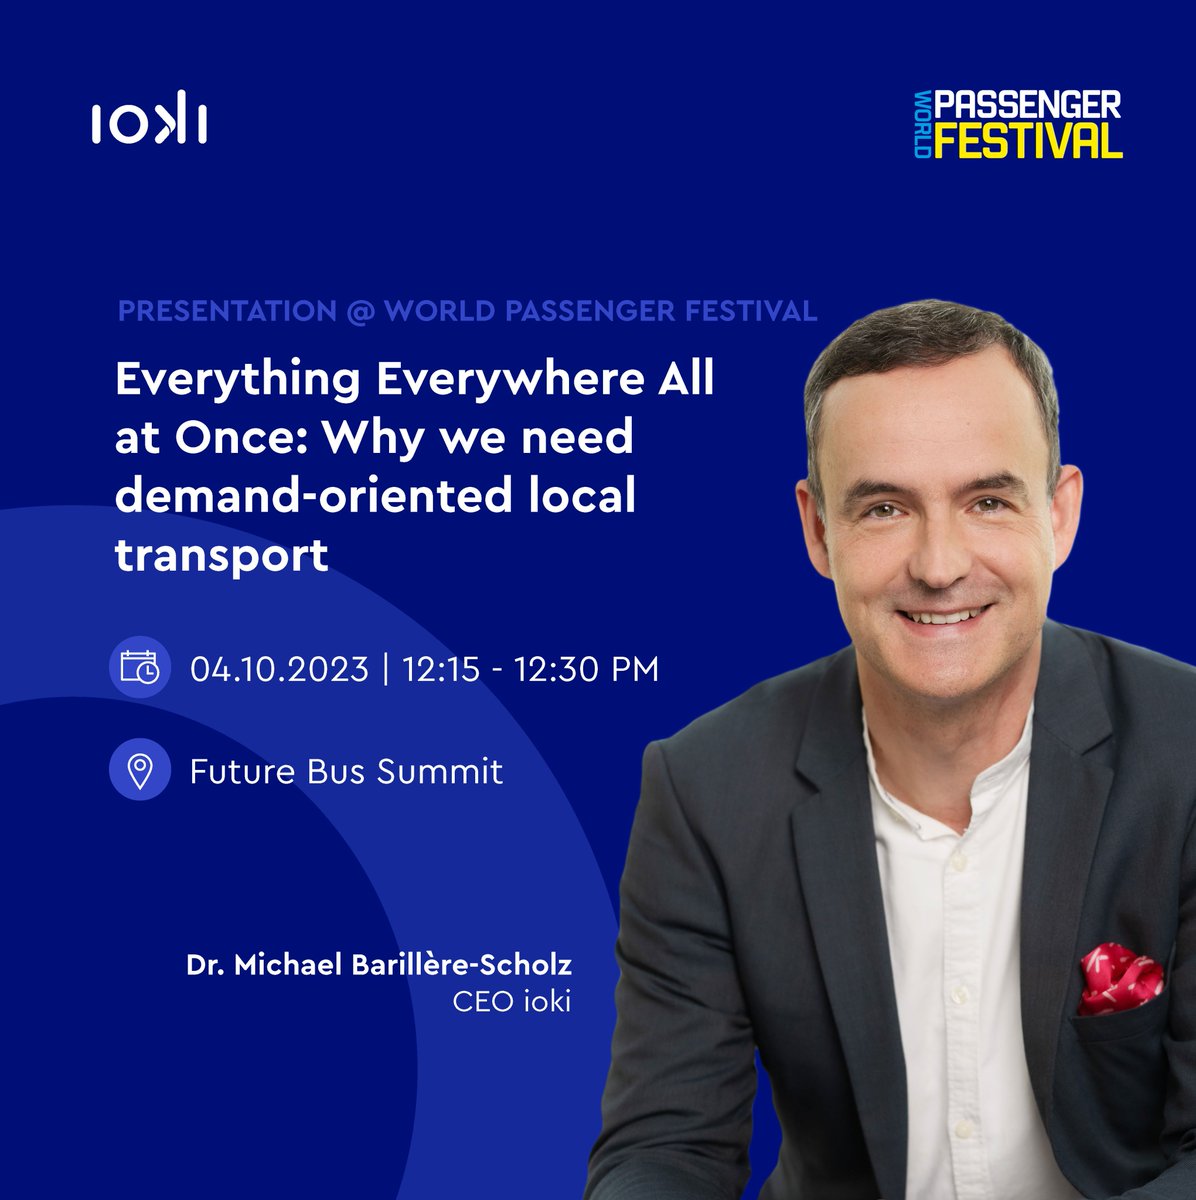 We are attending the @PassengerFest 🥳 This year's #PassengerFest will take place at the Messe Wien from 04.-05.10.2023! 📍Meet us at booth N° 82 🎤Catch our CEO @mibascho at the Future Bus Summit talking about why we need #demandresponsivetransport 👉fcld.ly/x84759h